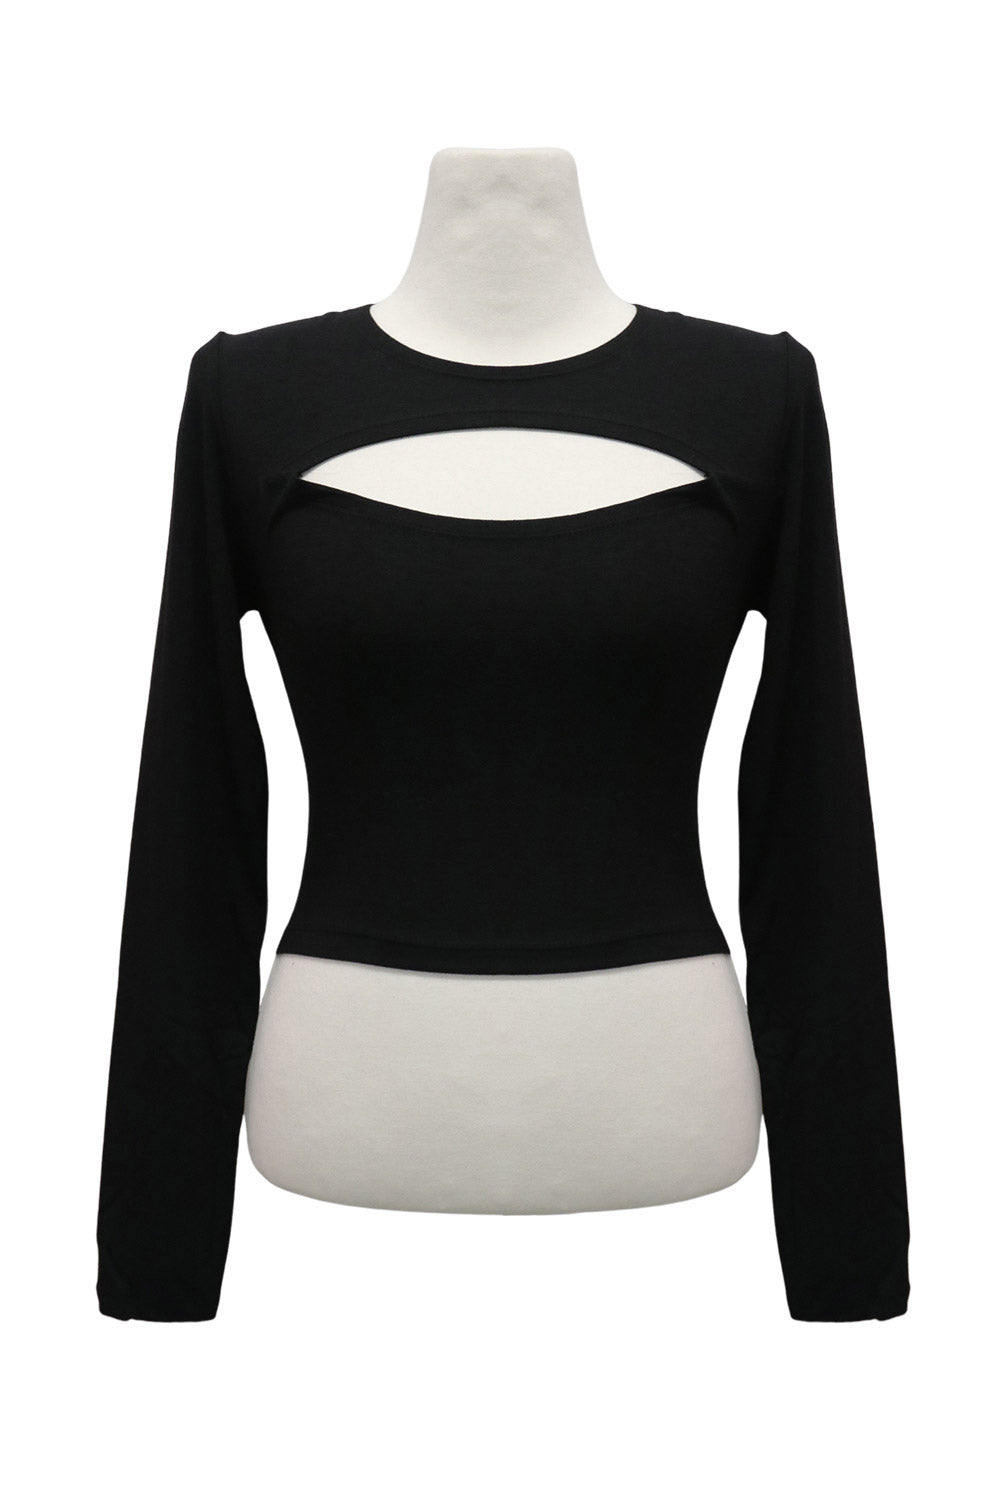 storets.com Shelly Cut Out Cropped Top